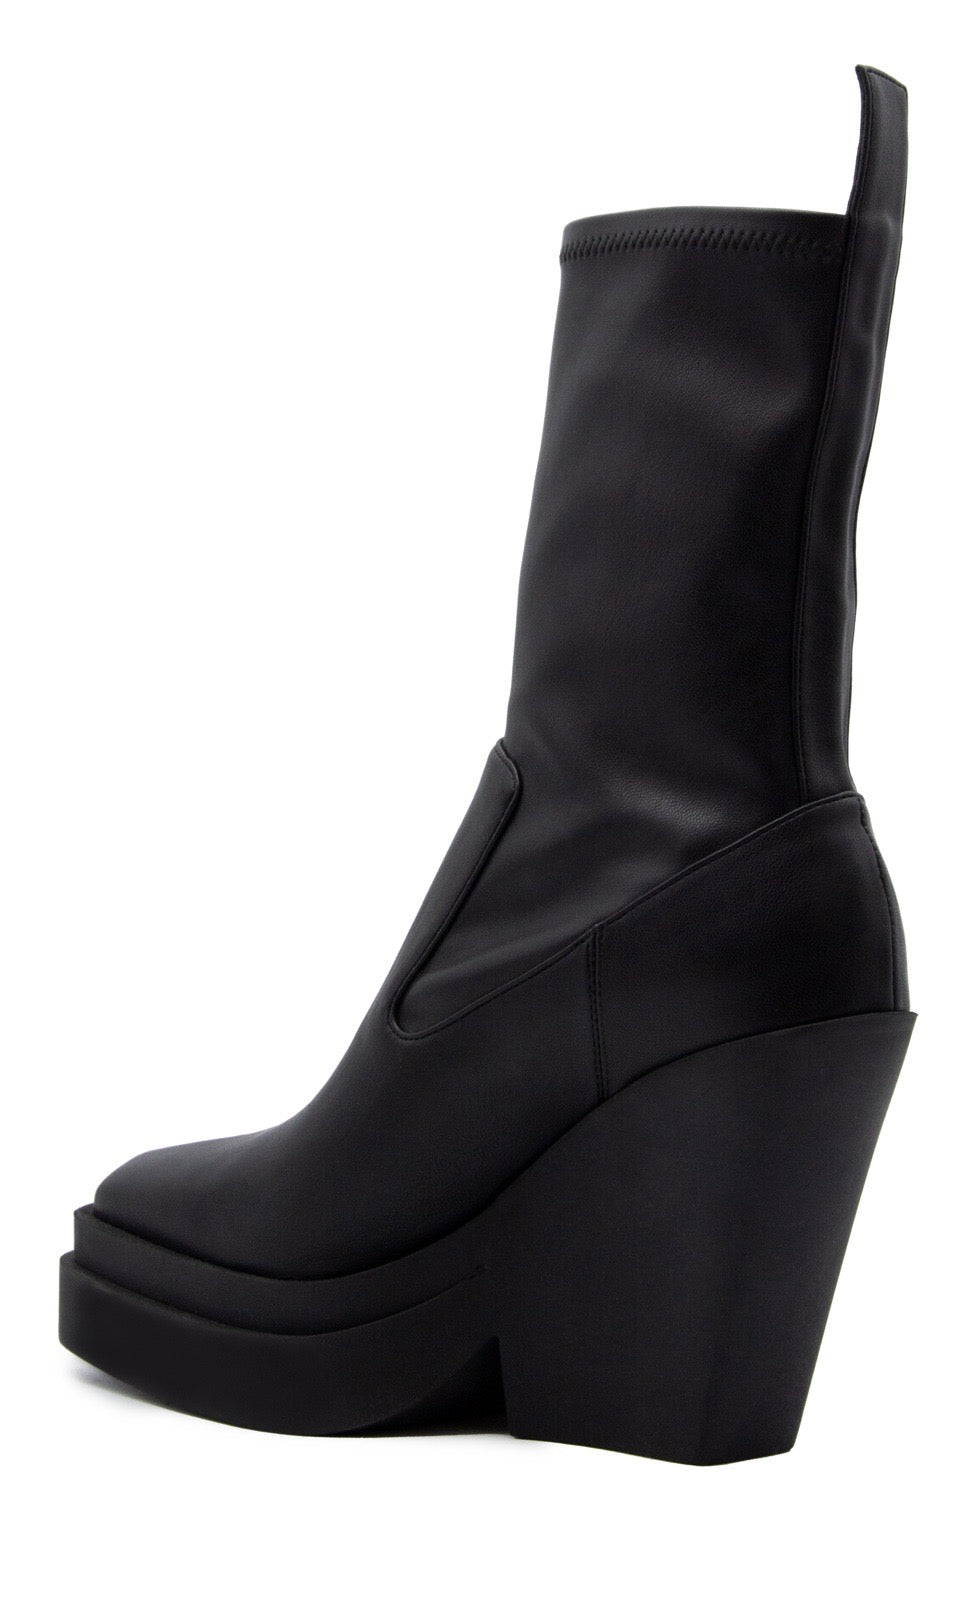 GIABORGHINI Texan ankle leather boots